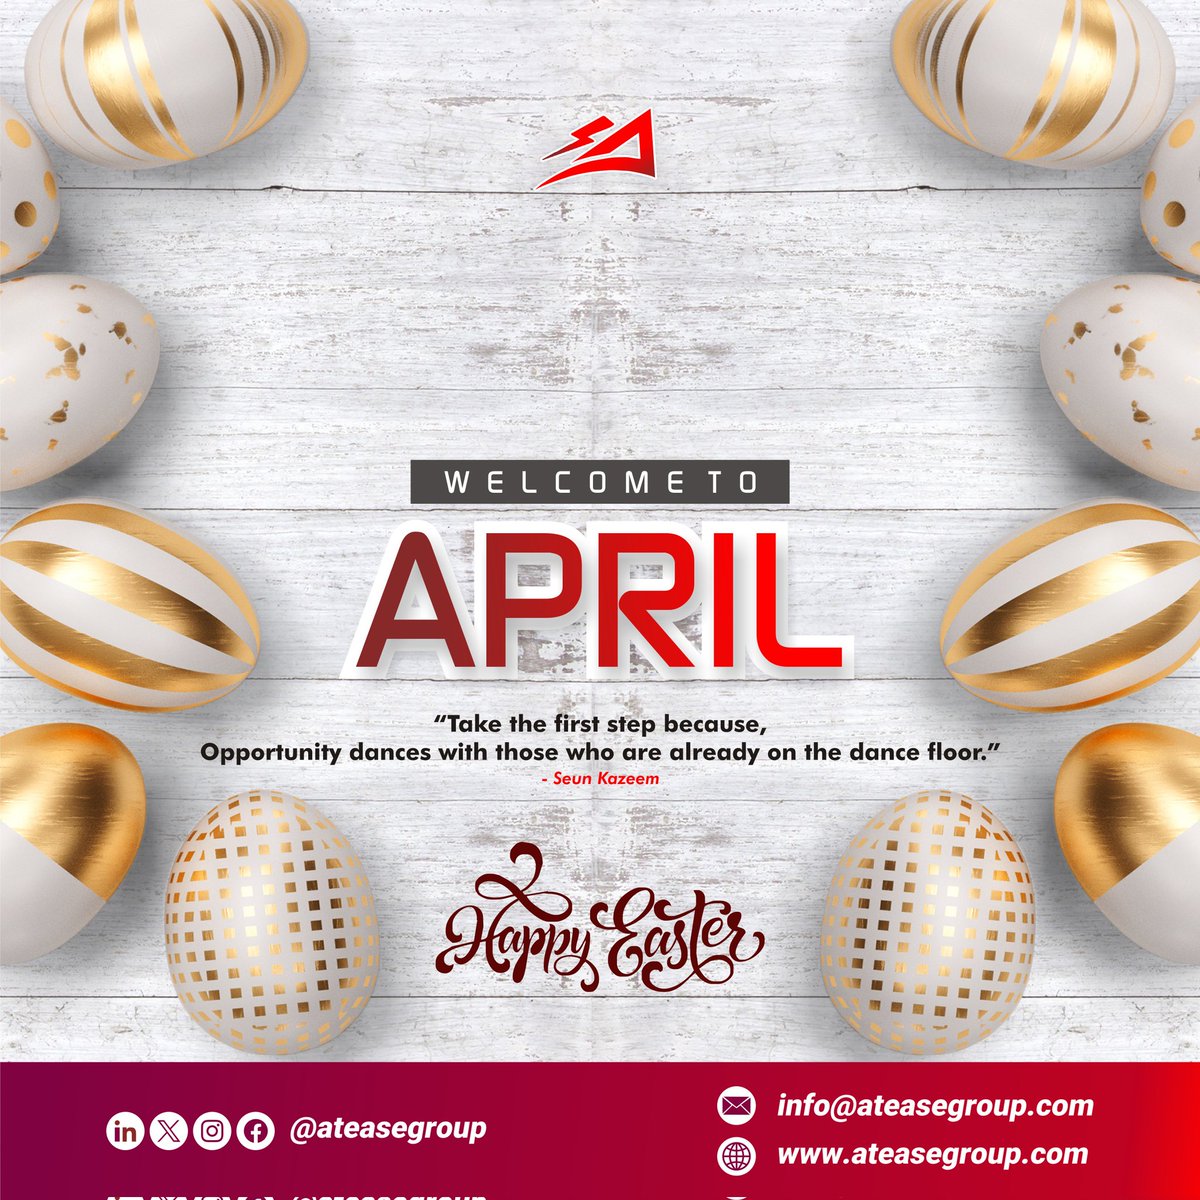 It's a New Month... Take a first step because, opportunity dances with those who are already on the dance floor

#AprilFoolsDay #EasterMonday
Breaking News Omotara Johnson
Dangote Yorubas